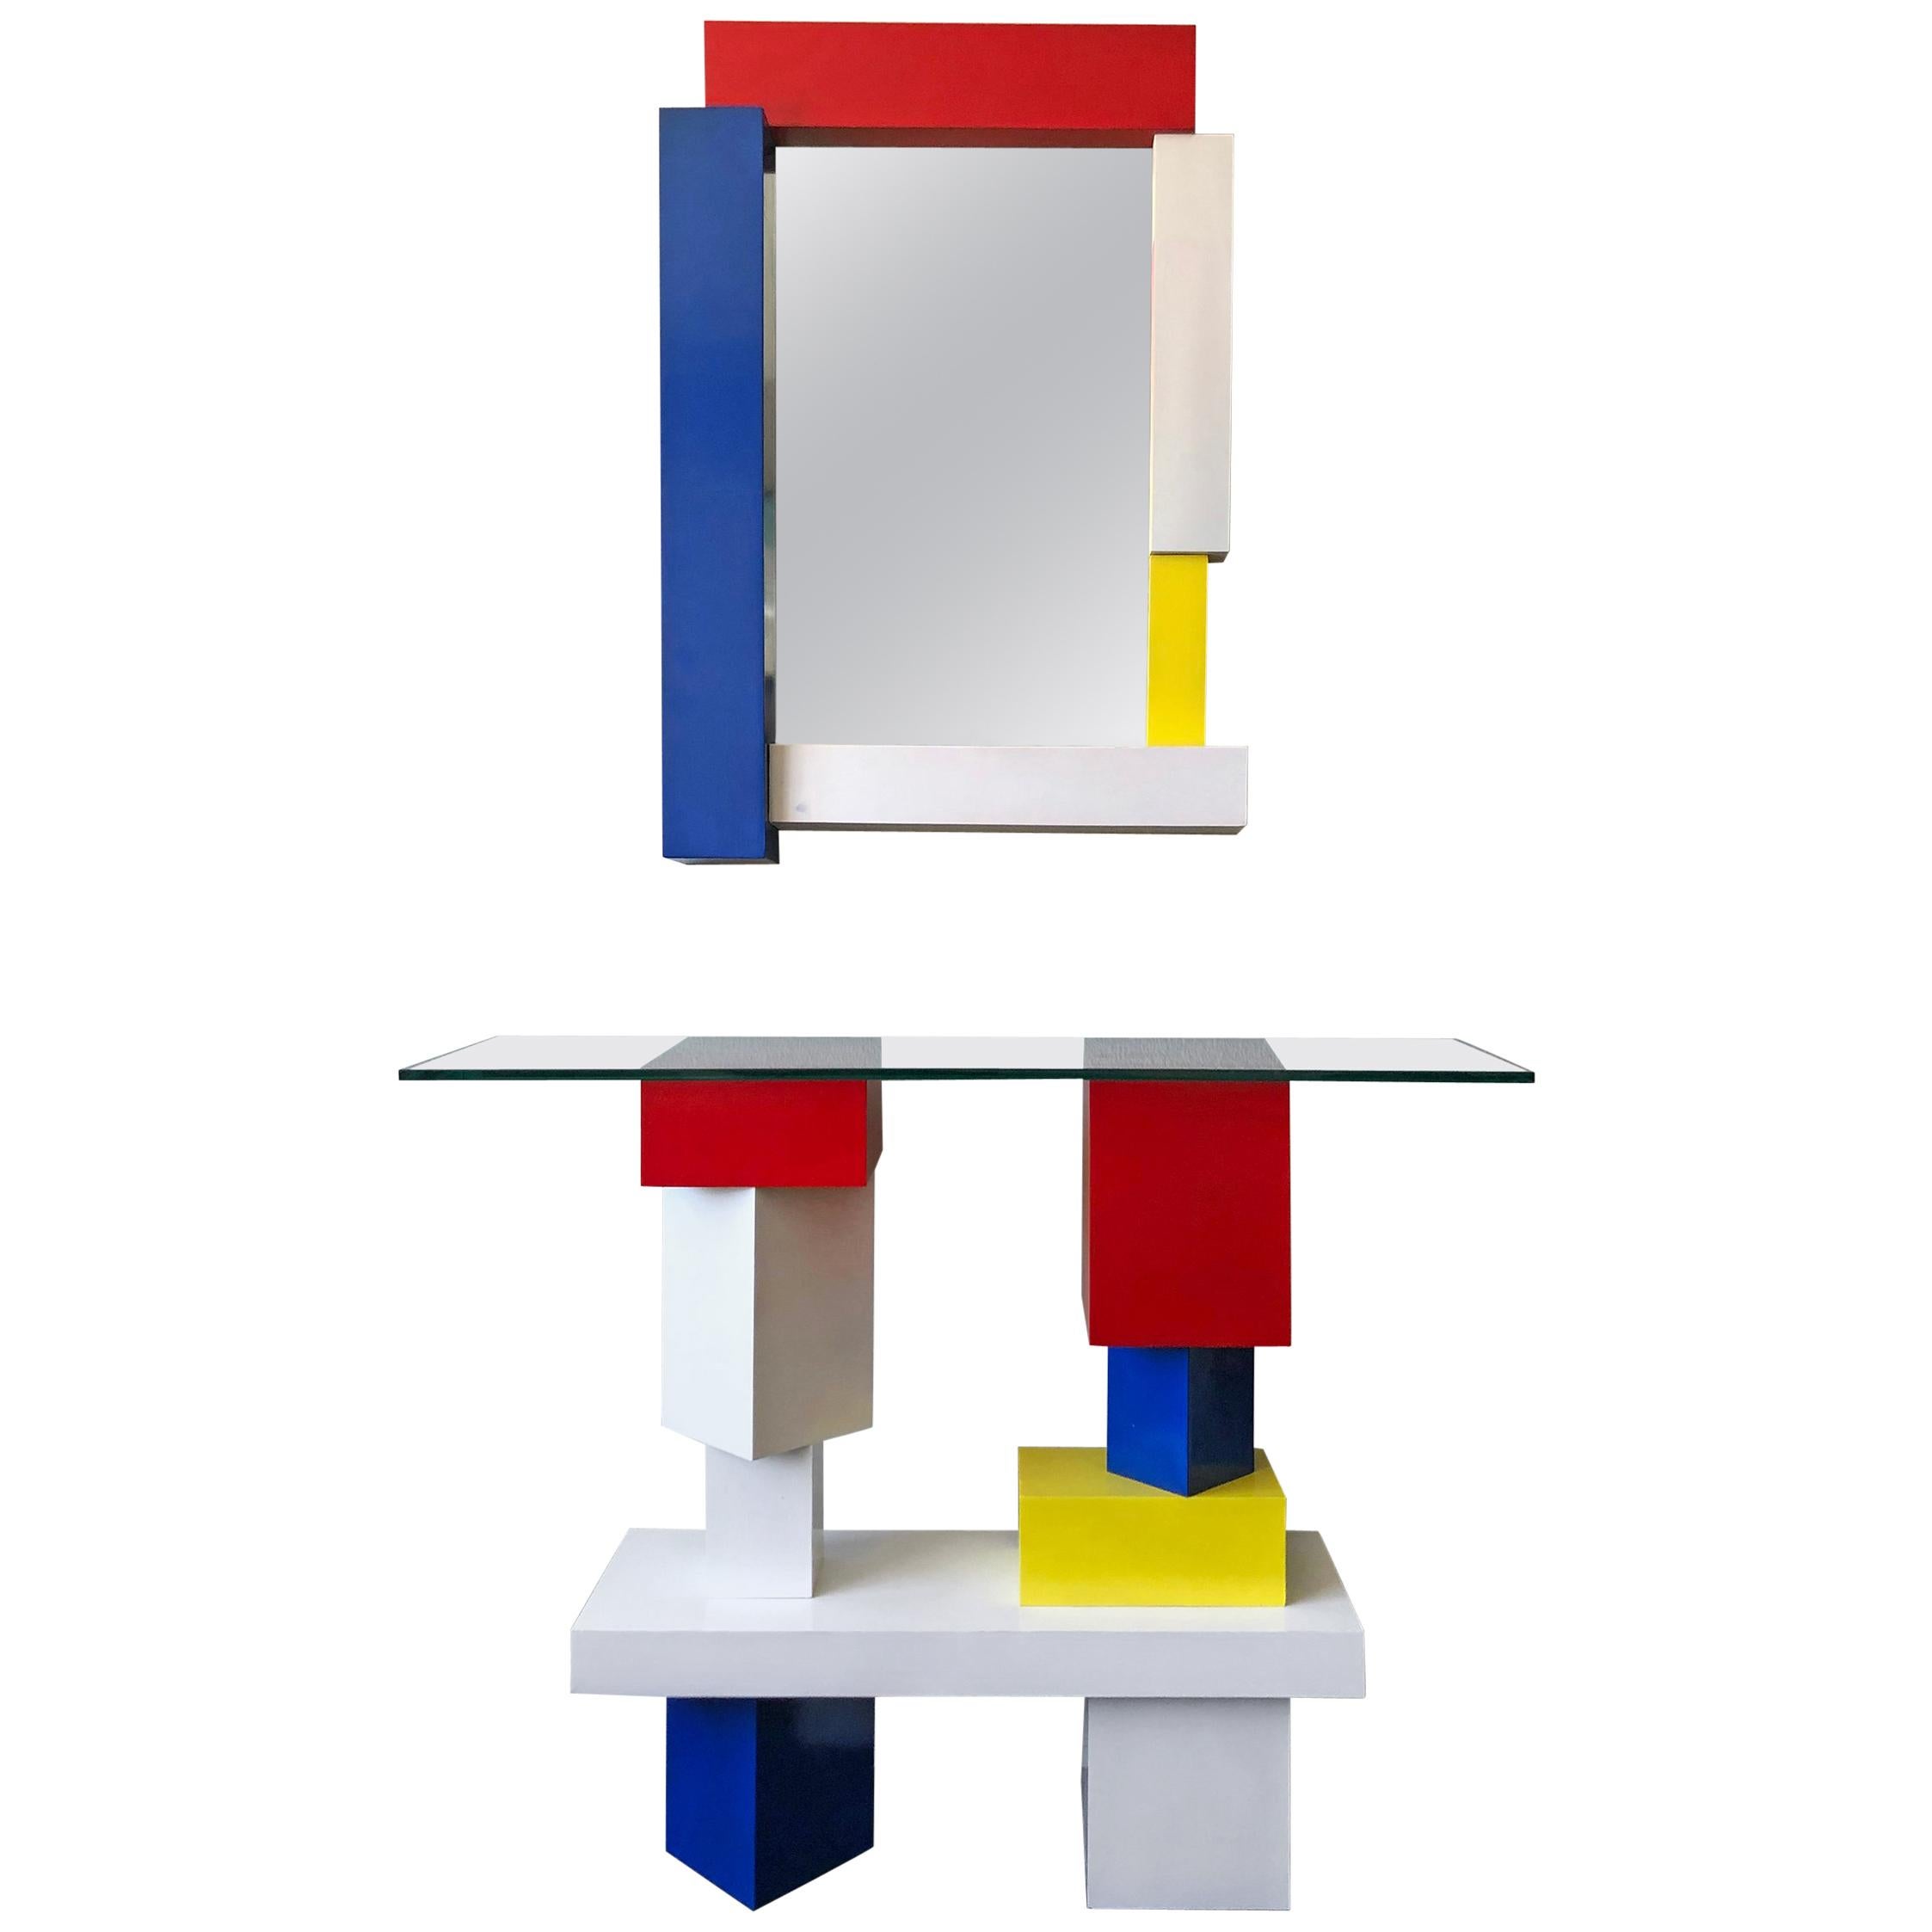 De Stijl Mondrian Style Console Table and Mirror, Signed, 1994